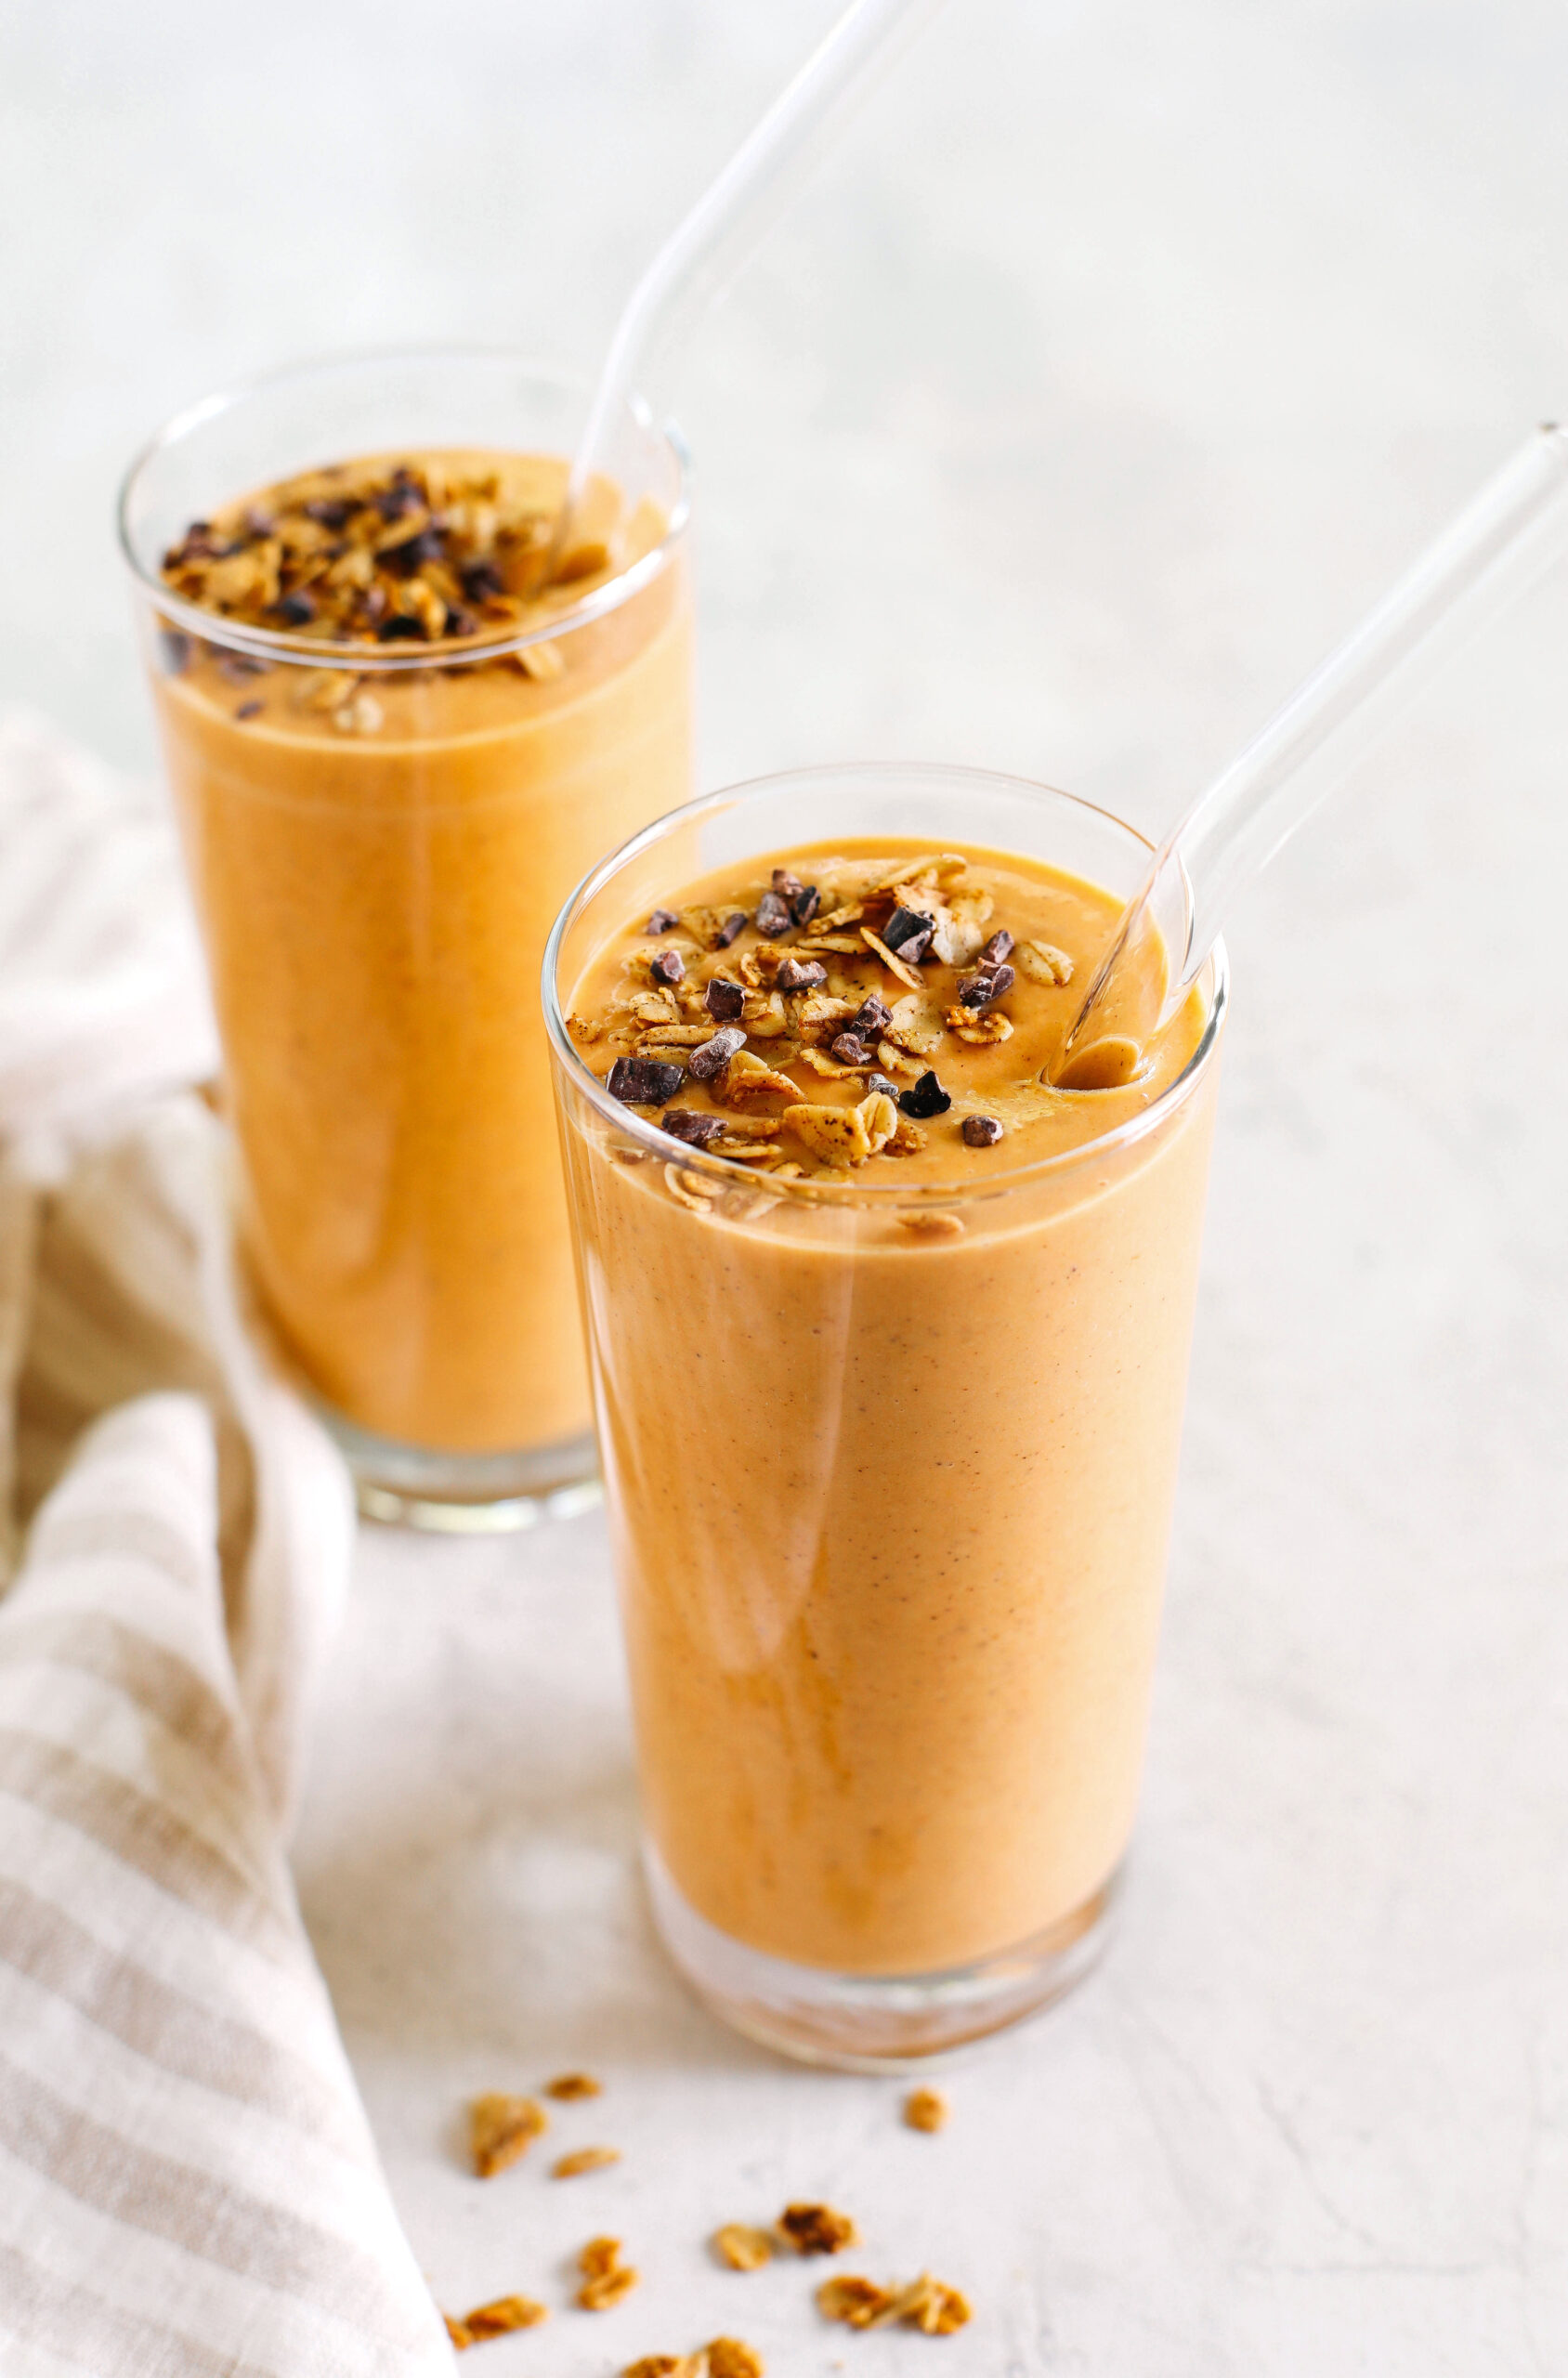 Start your morning off with this thick and creamy Pumpkin Spice Smoothie that is healthy, delicious and loaded with all your fall favorites like pumpkin, apple, banana, Greek yogurt, maple syrup and warm spices!